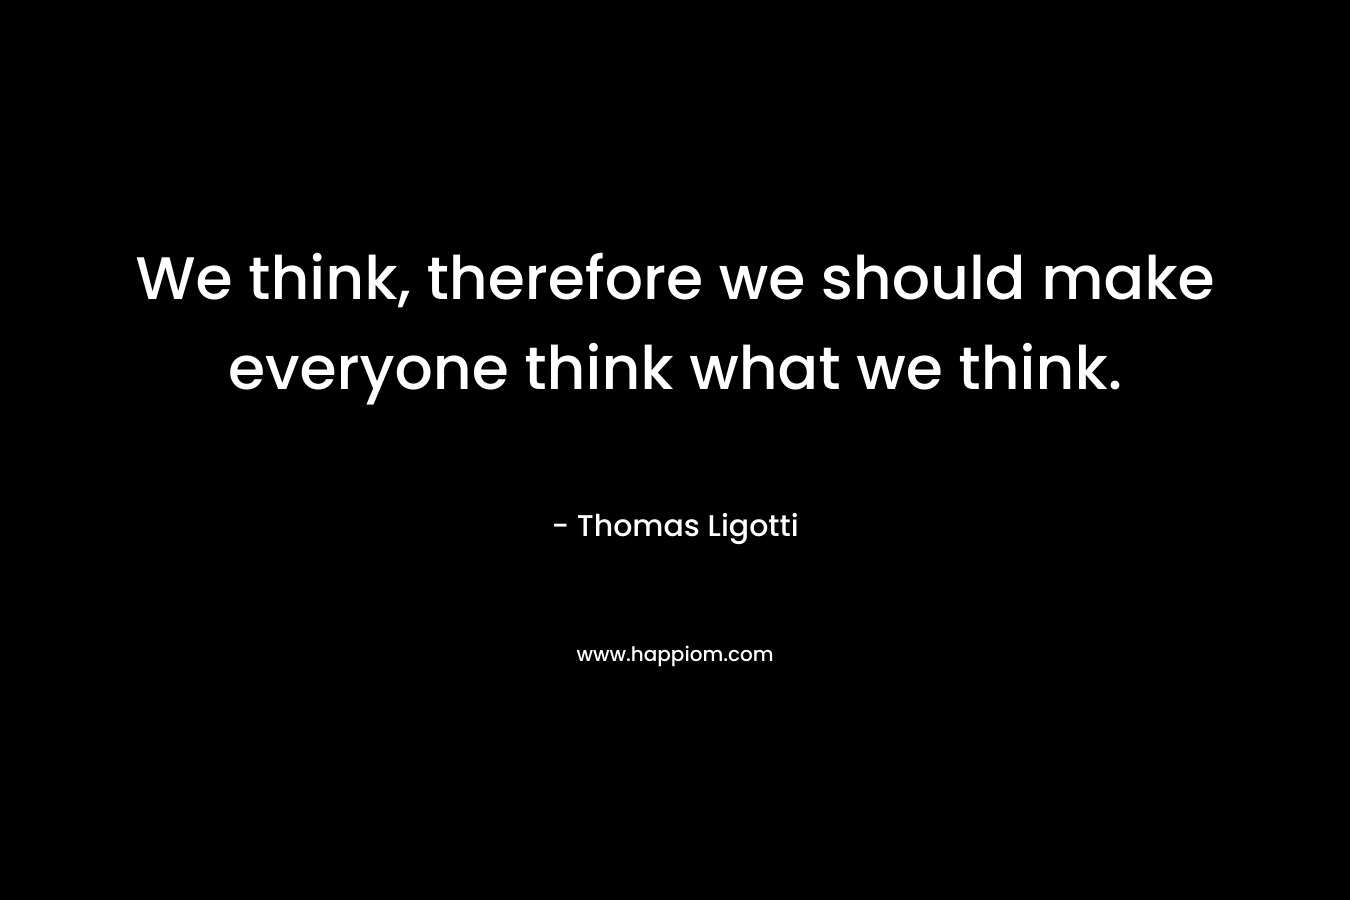 We think, therefore we should make everyone think what we think.